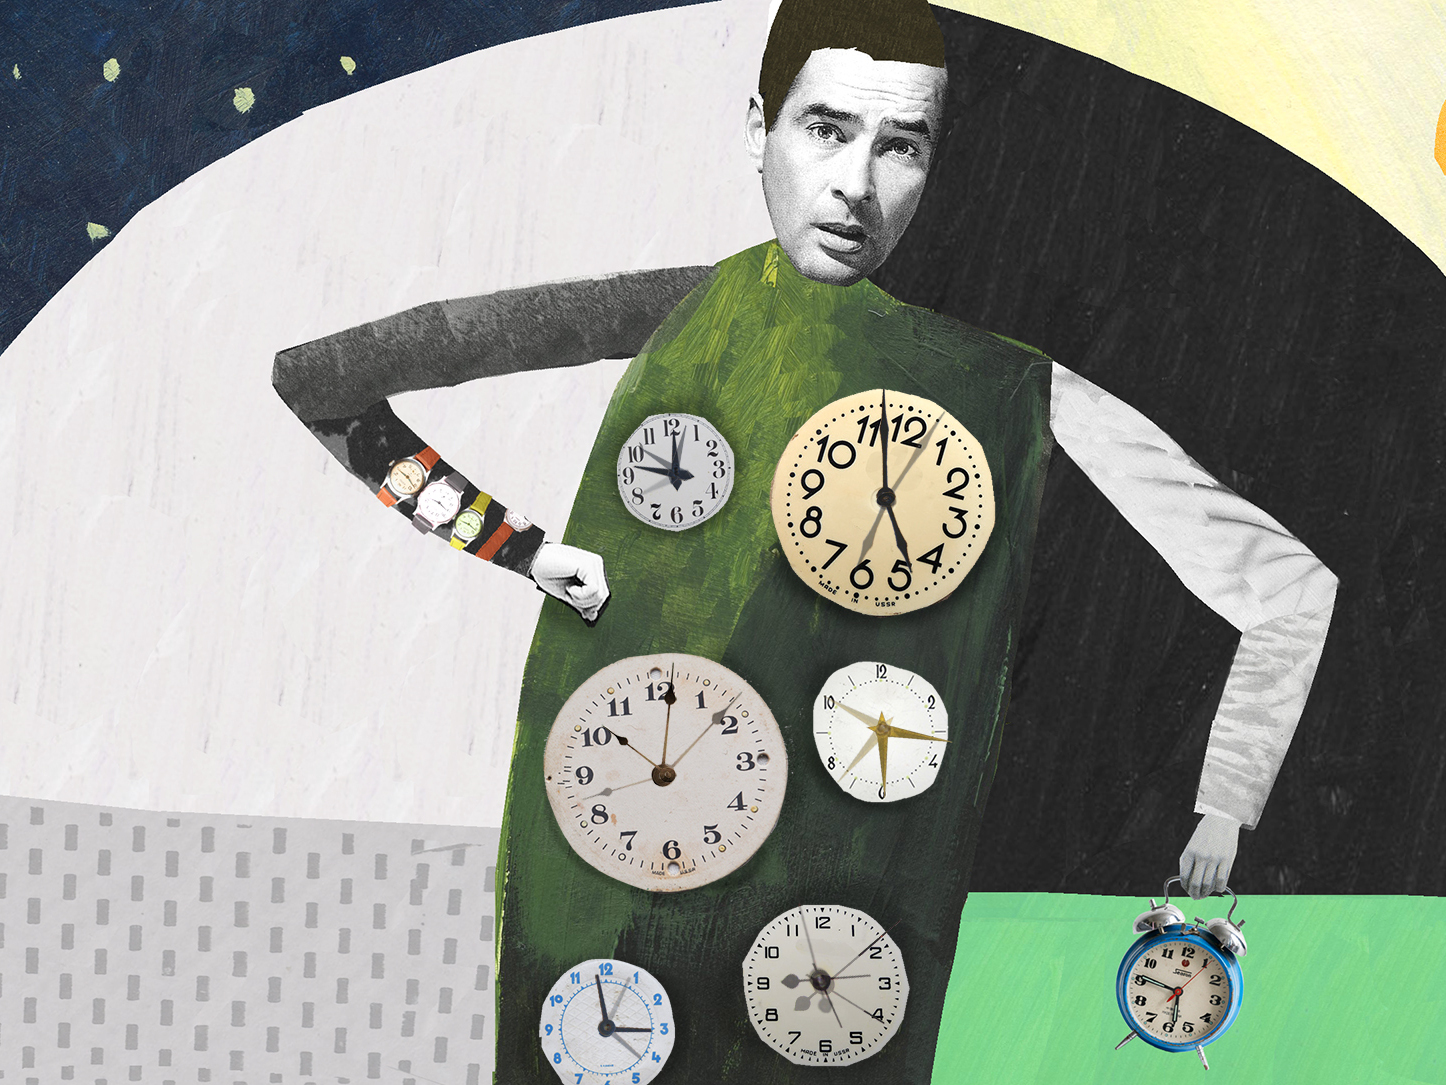 Circadian clocks run in every cell in our bodies.